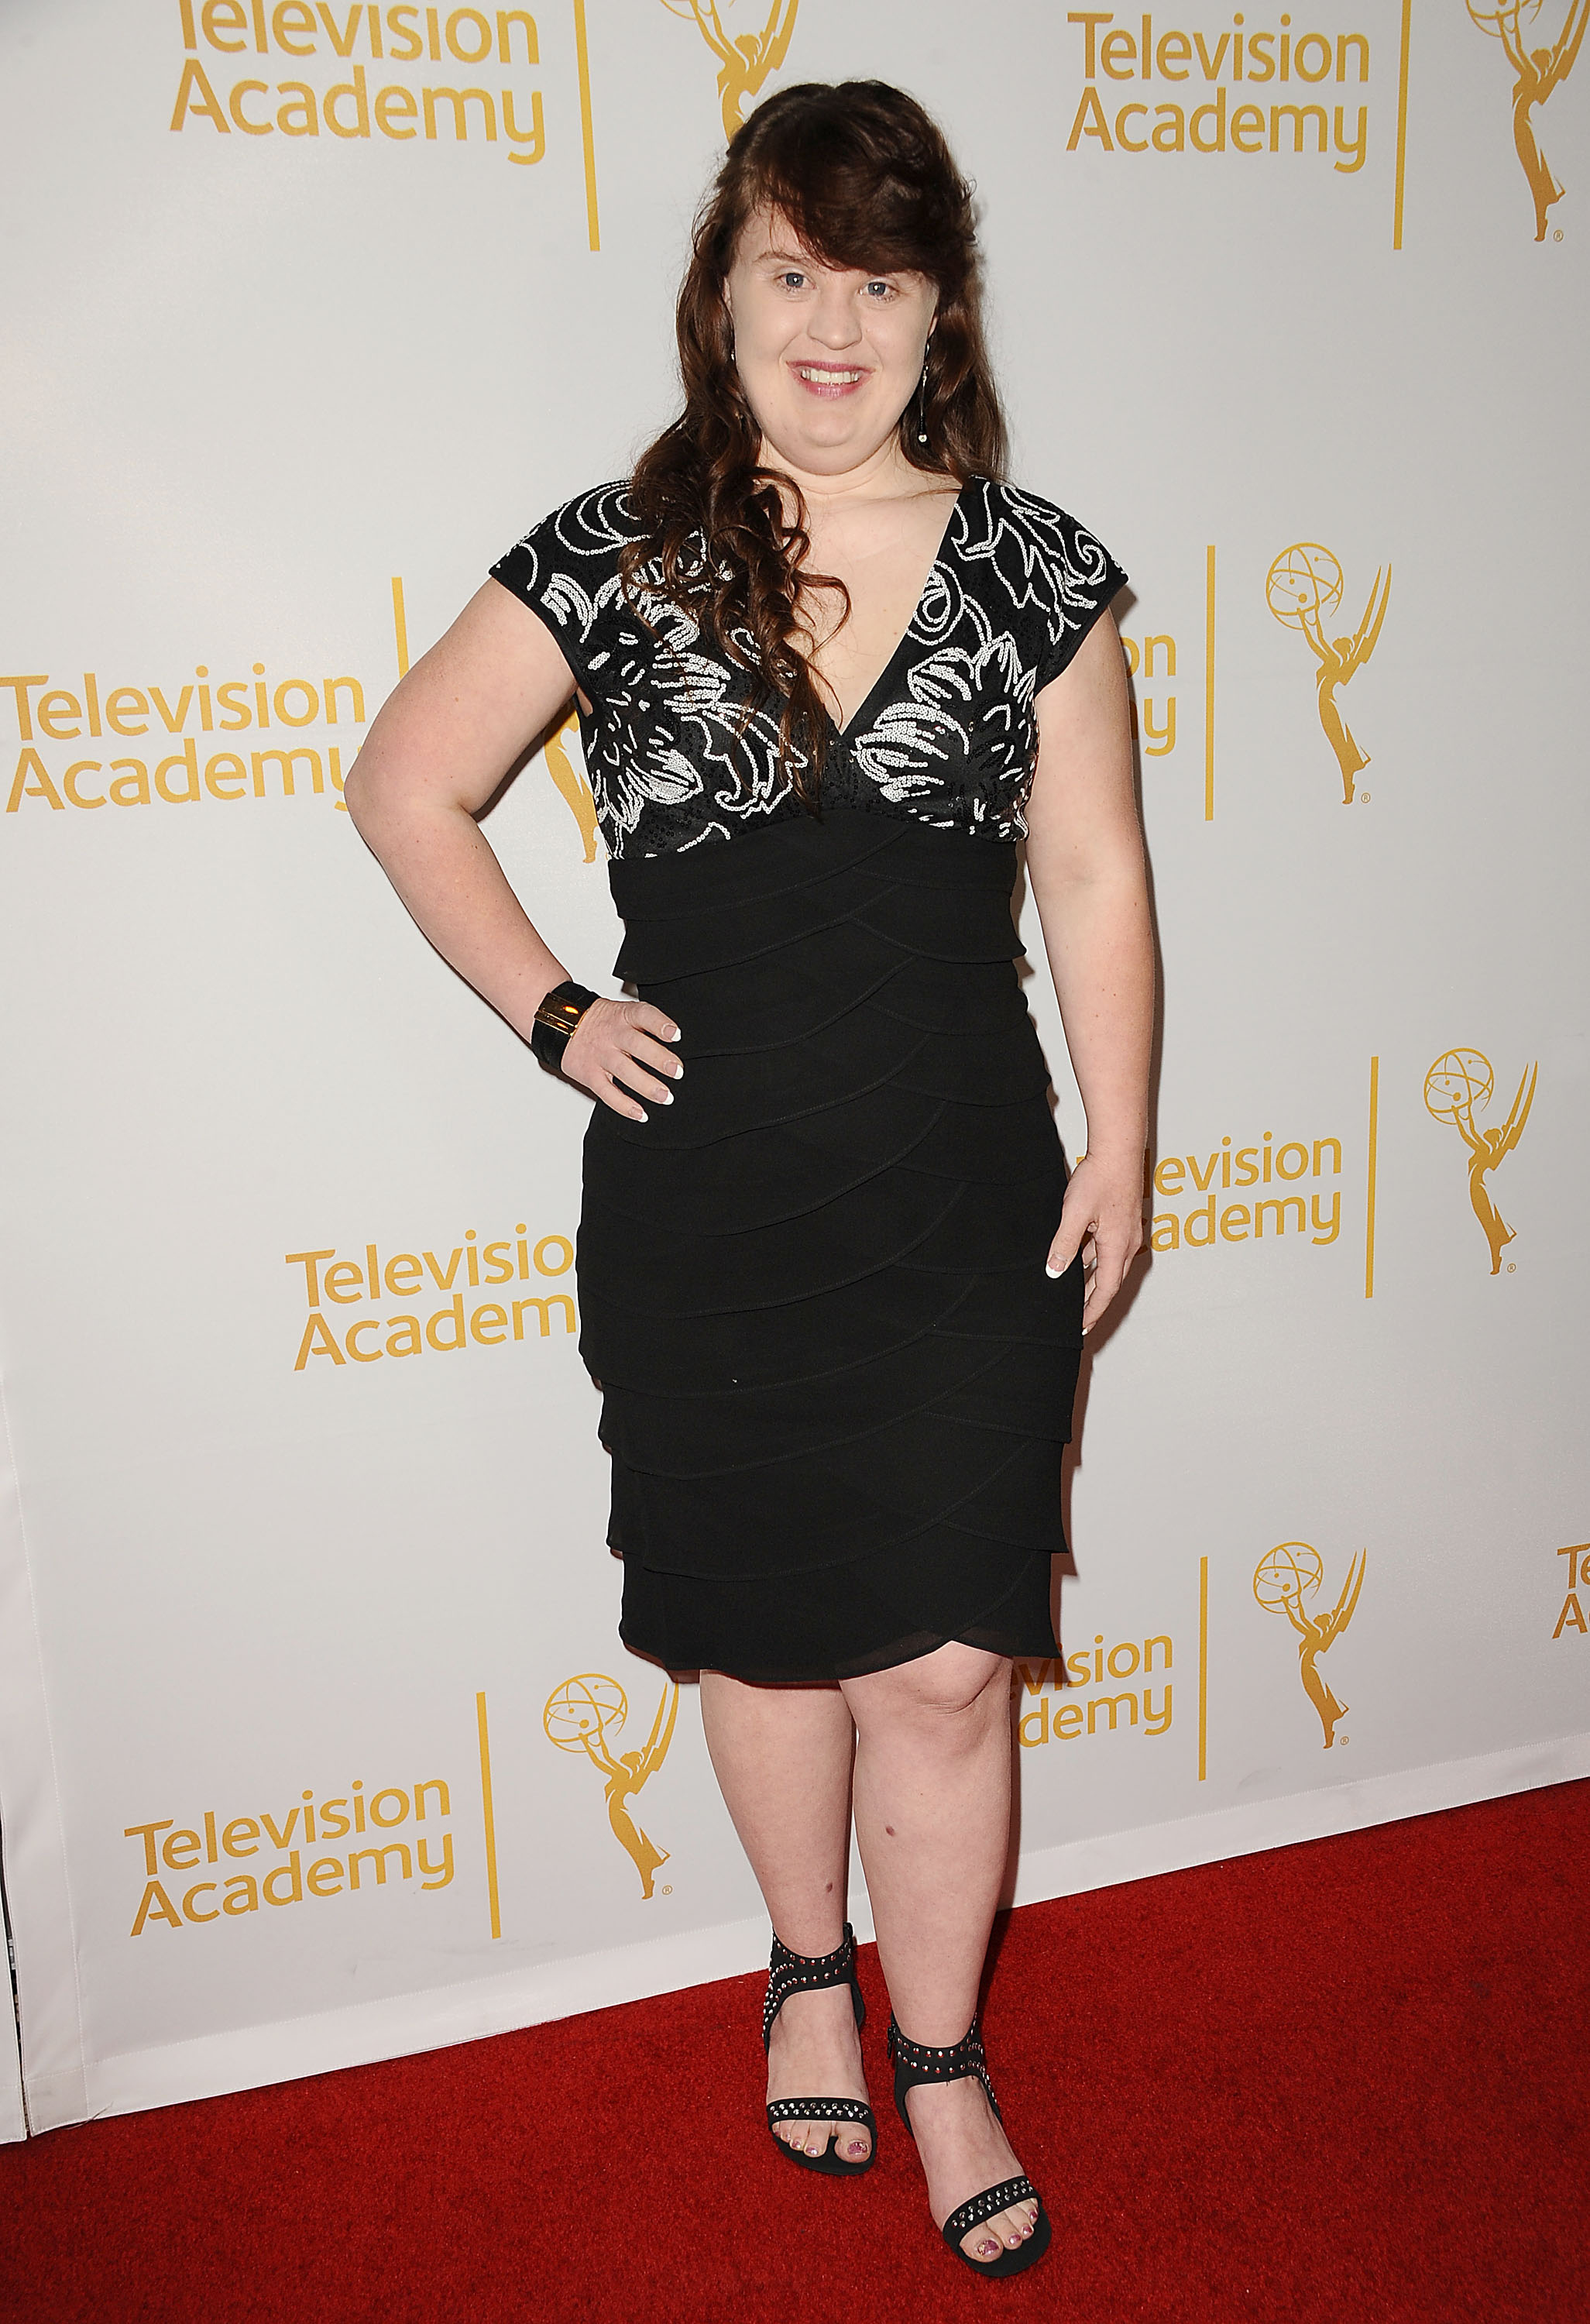 WEST HOLLYWOOD, CA - AUGUST 22: Actress Jamie Brewer attends the Television Academy Producers Peer Group nominee reception for the 66th Emmy Awards at The London West Hollywood on August 22, 2014 in West Hollywood, California.